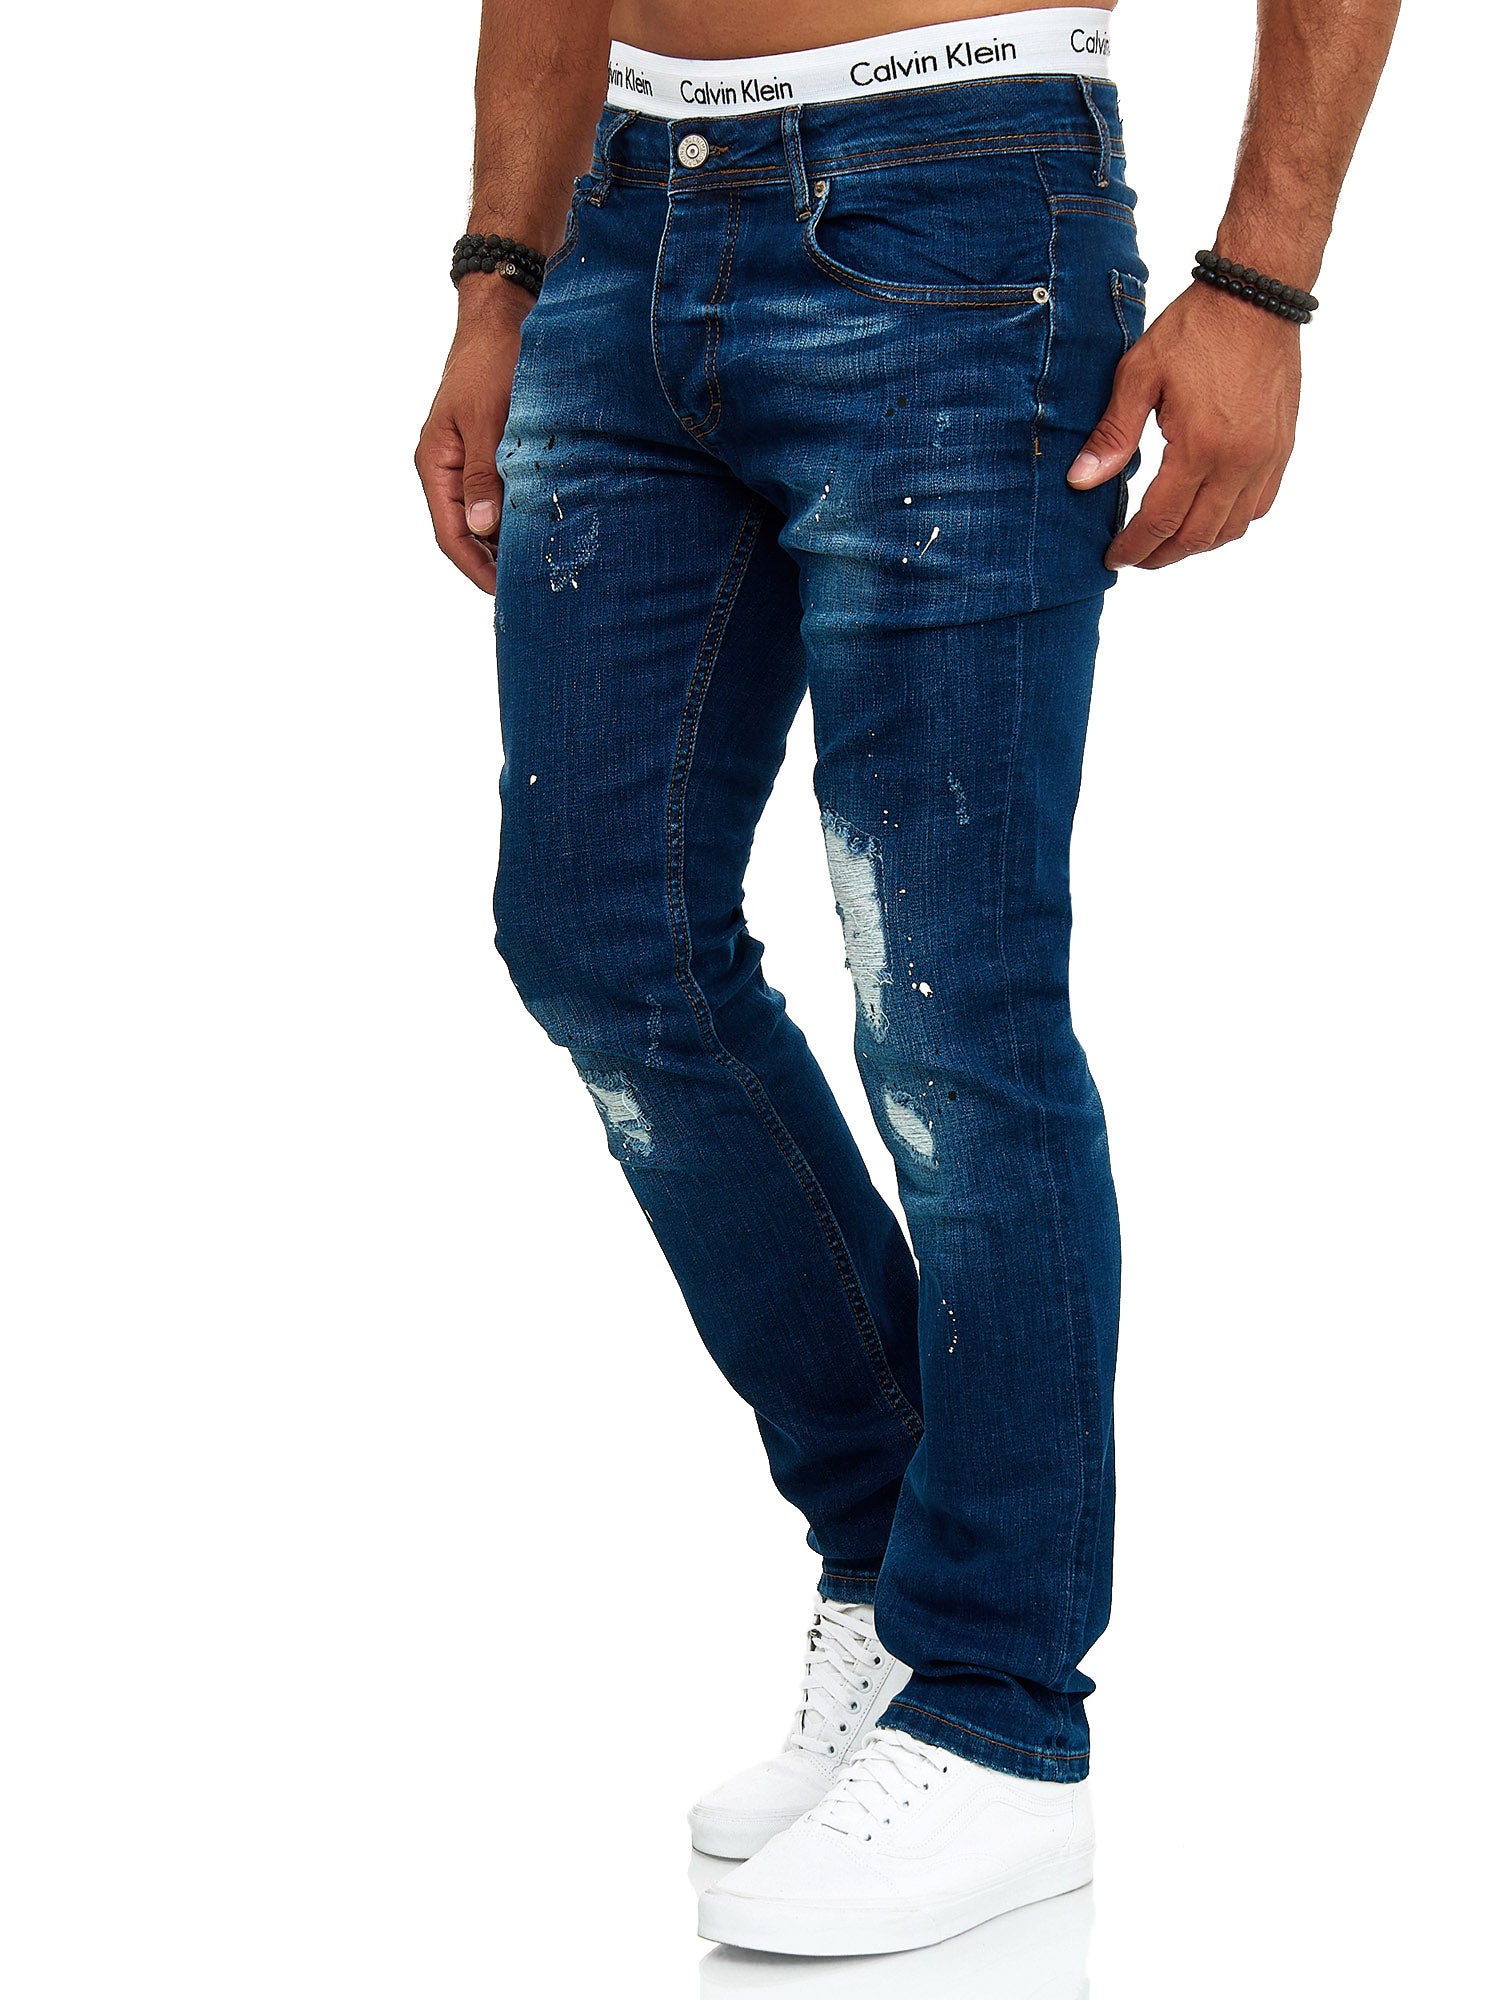 Rego Distressed Jeans - Blue X77 - FASH STOP